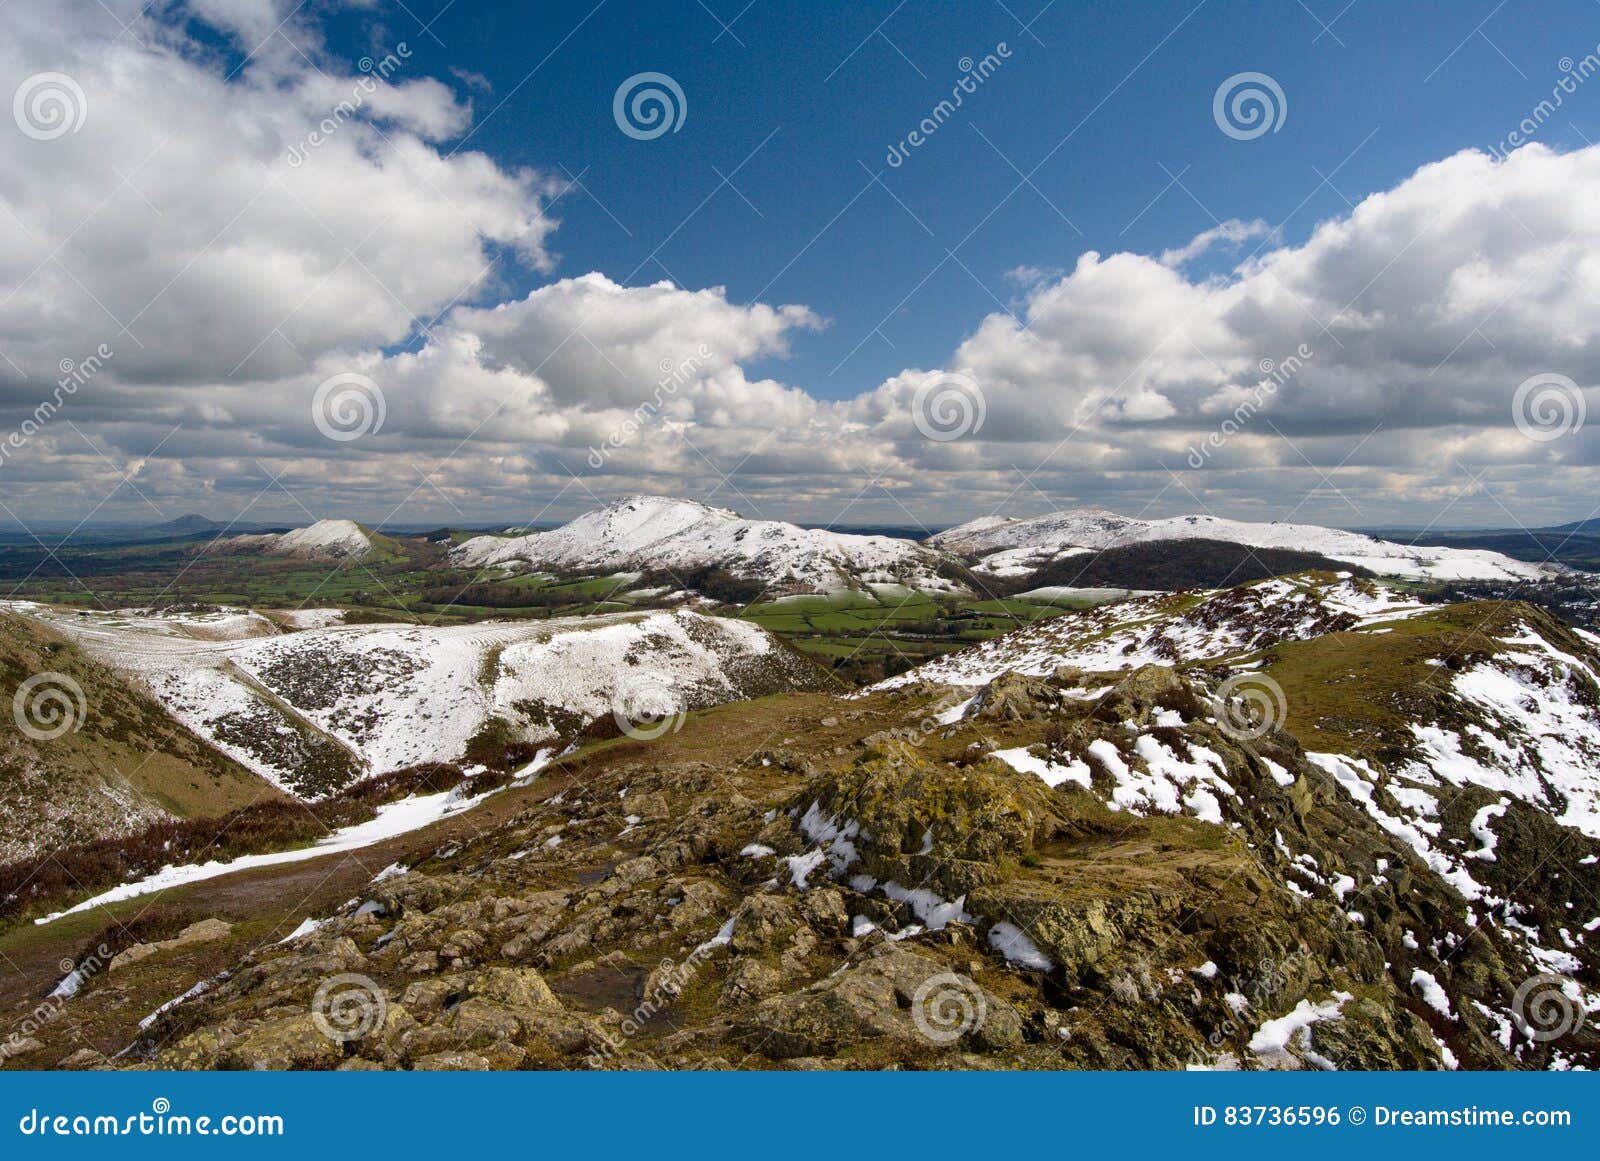 hill of the long mynd, view on the carding mill valley and caer caradoc, rocks in foreground, shropshire hills uk